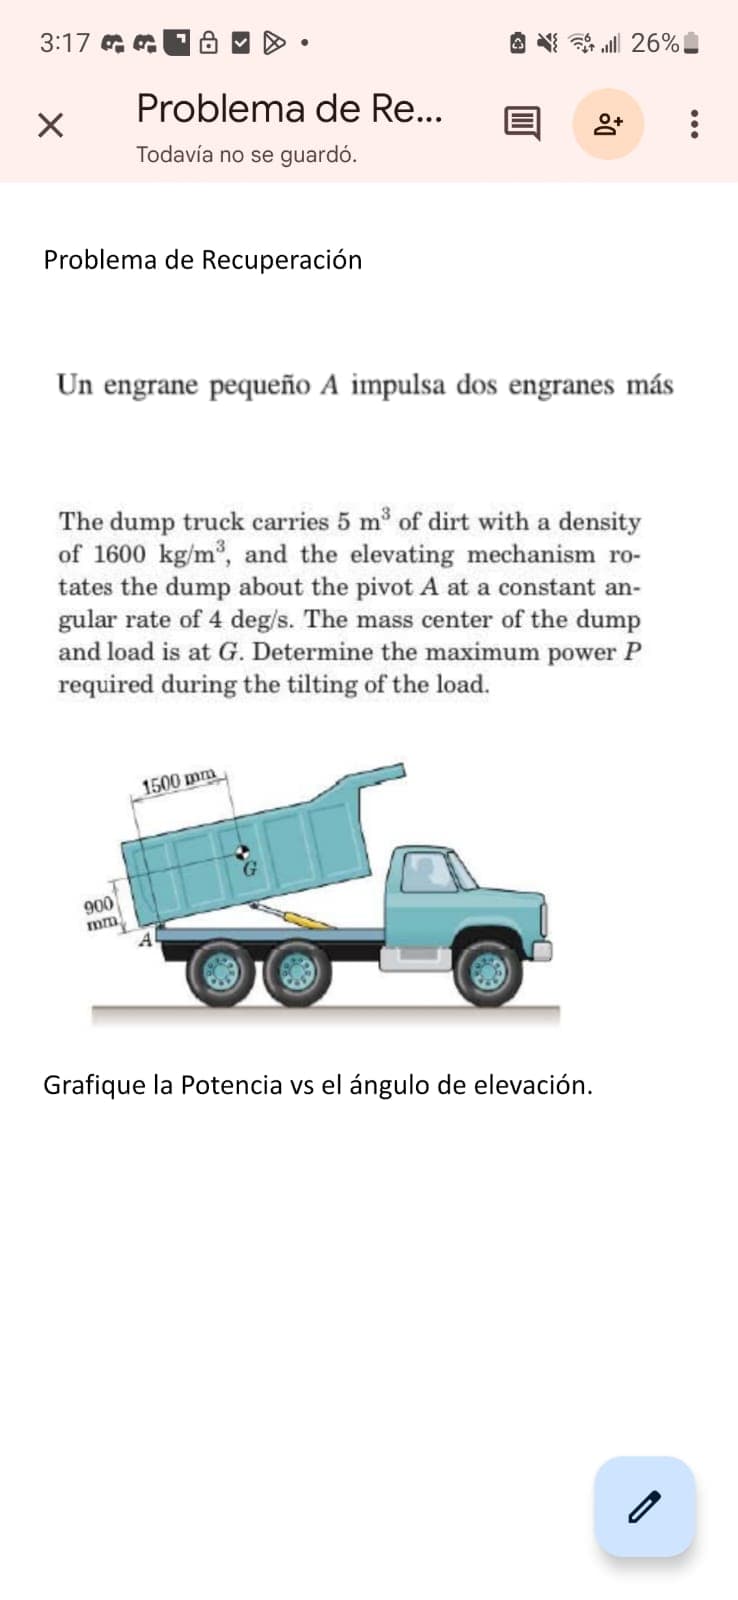 3:17
Problema de Re...
+
Todavía no se guardó.
Problema de Recuperación
26%
Un engrane pequeño A impulsa dos engranes más
The dump truck carries 5 m³ of dirt with a density
of 1600 kg/m³, and the elevating mechanism ro-
tates the dump about the pivot A at a constant an-
gular rate of 4 deg/s. The mass center of the dump
and load is at G. Determine the maximum power P
required during the tilting of the load.
1500 mm
900
mm
A
Grafique la Potencia vs el ángulo de elevación.